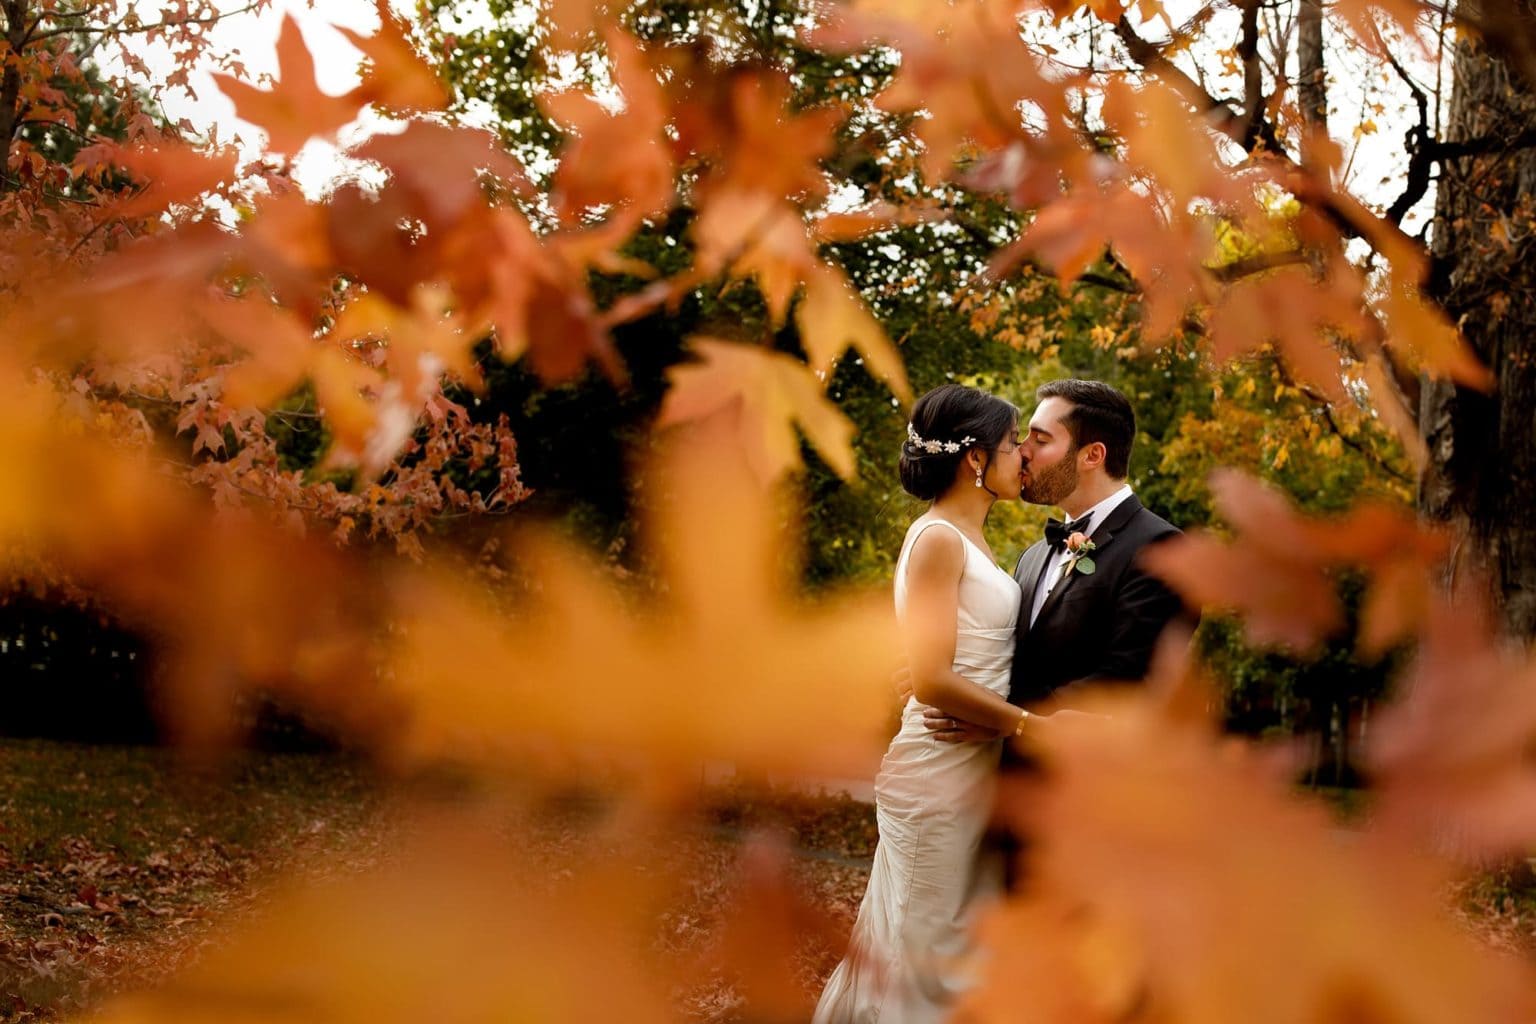 The couple share a kiss surrounded by maple leaves in Boulder, Colorado